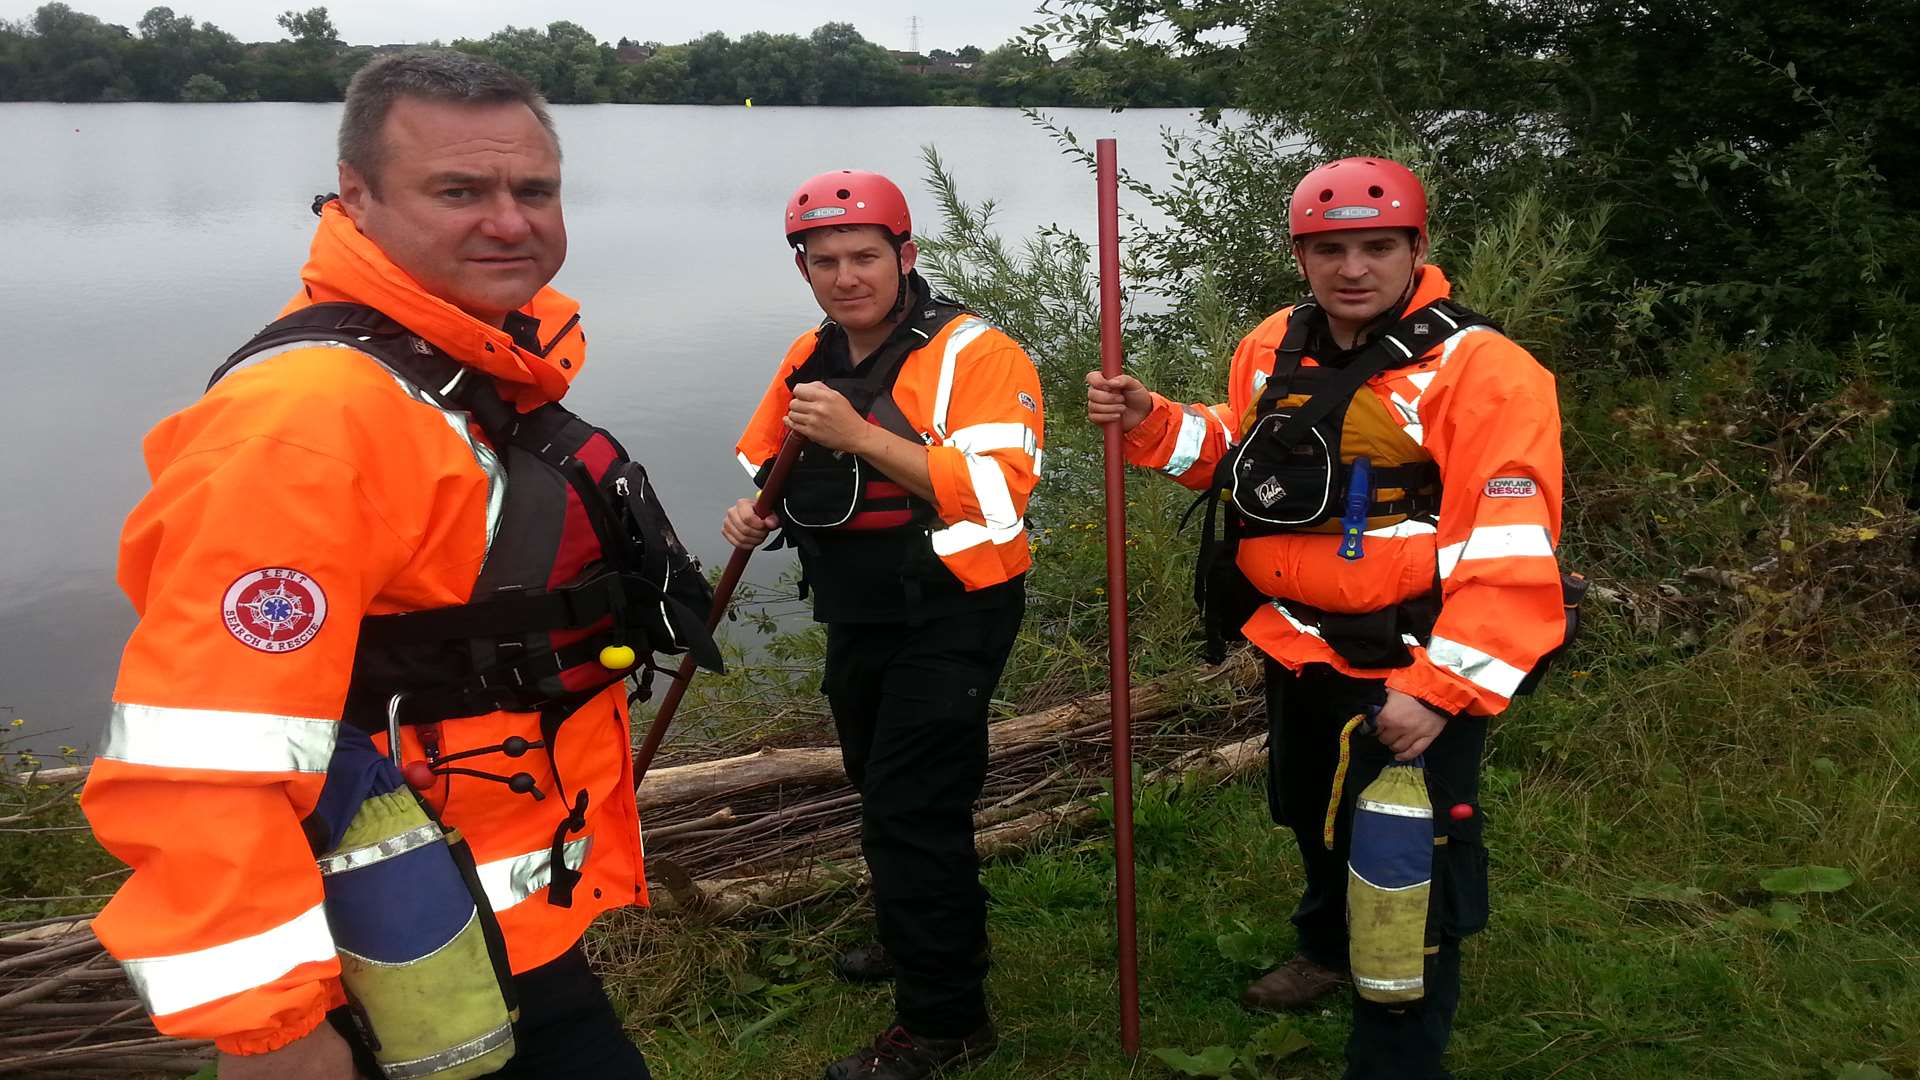 One of the bank search teams from Kent Search and Rescue: from left: Andy Heselwood (Headcorn), John Walker (Sittingbourne) and Matt Hurley (Sittingbourne).